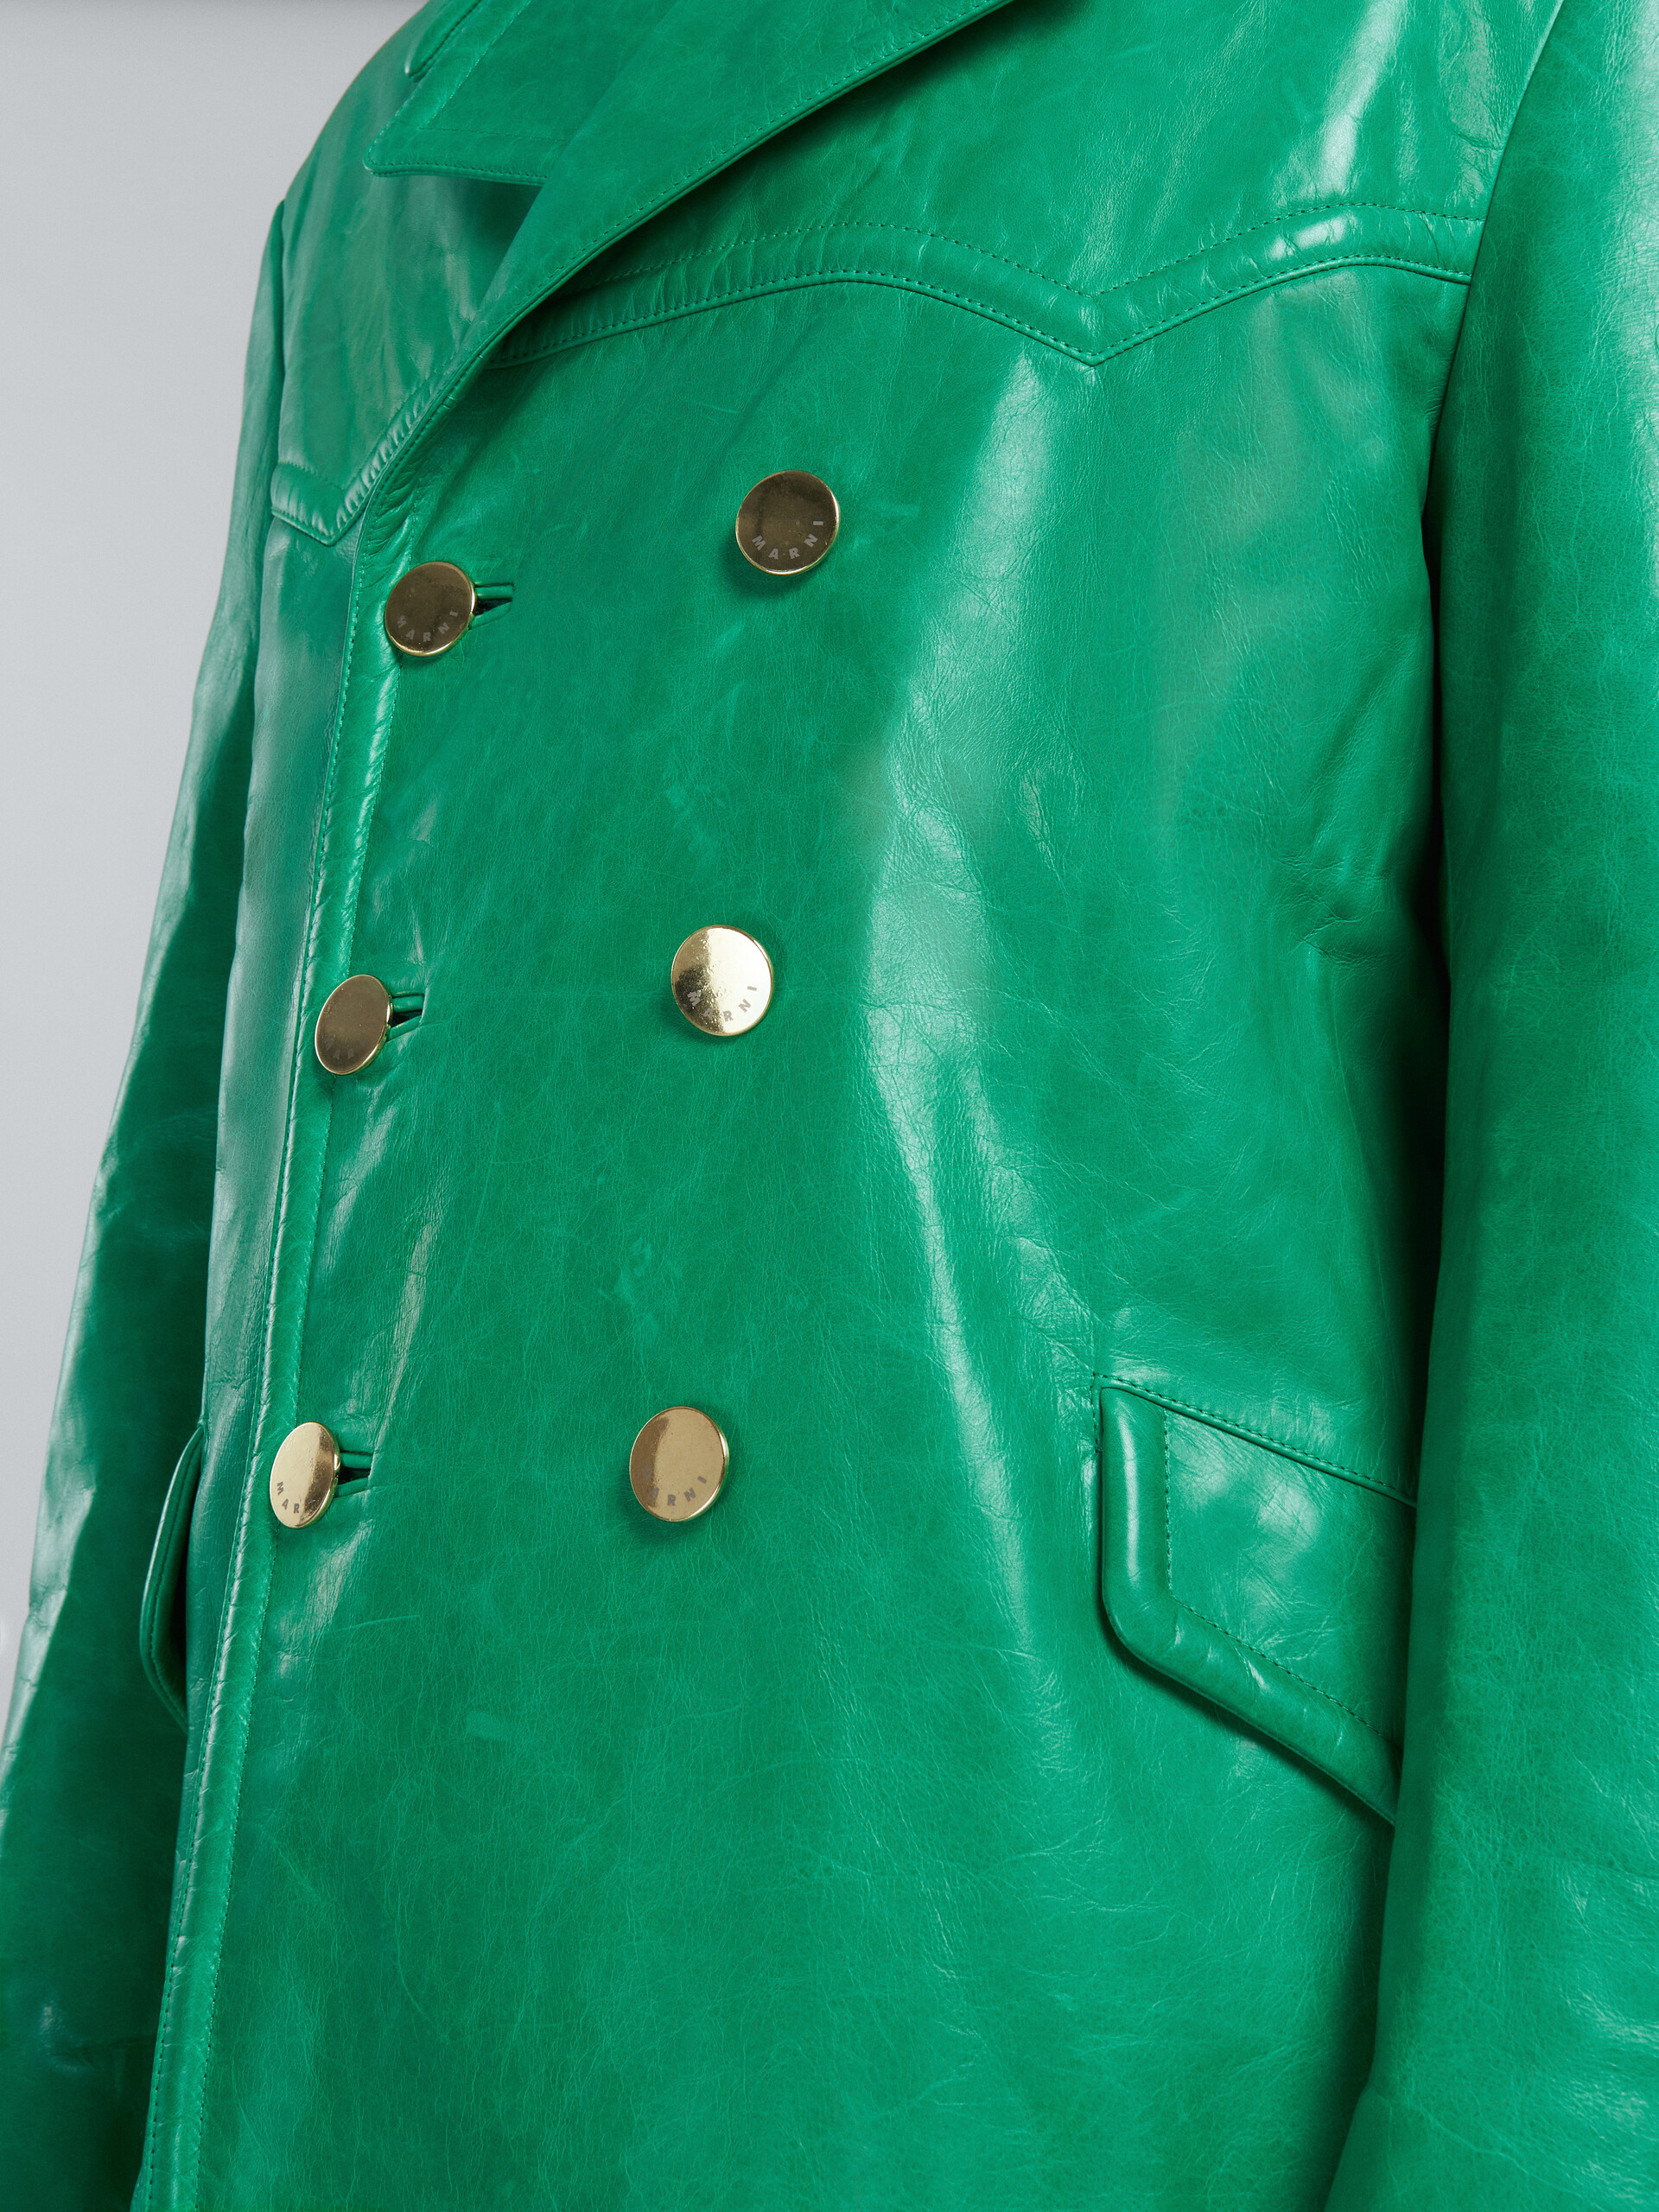 Double-breasted jacket in shiny green leather - Coats - Image 5